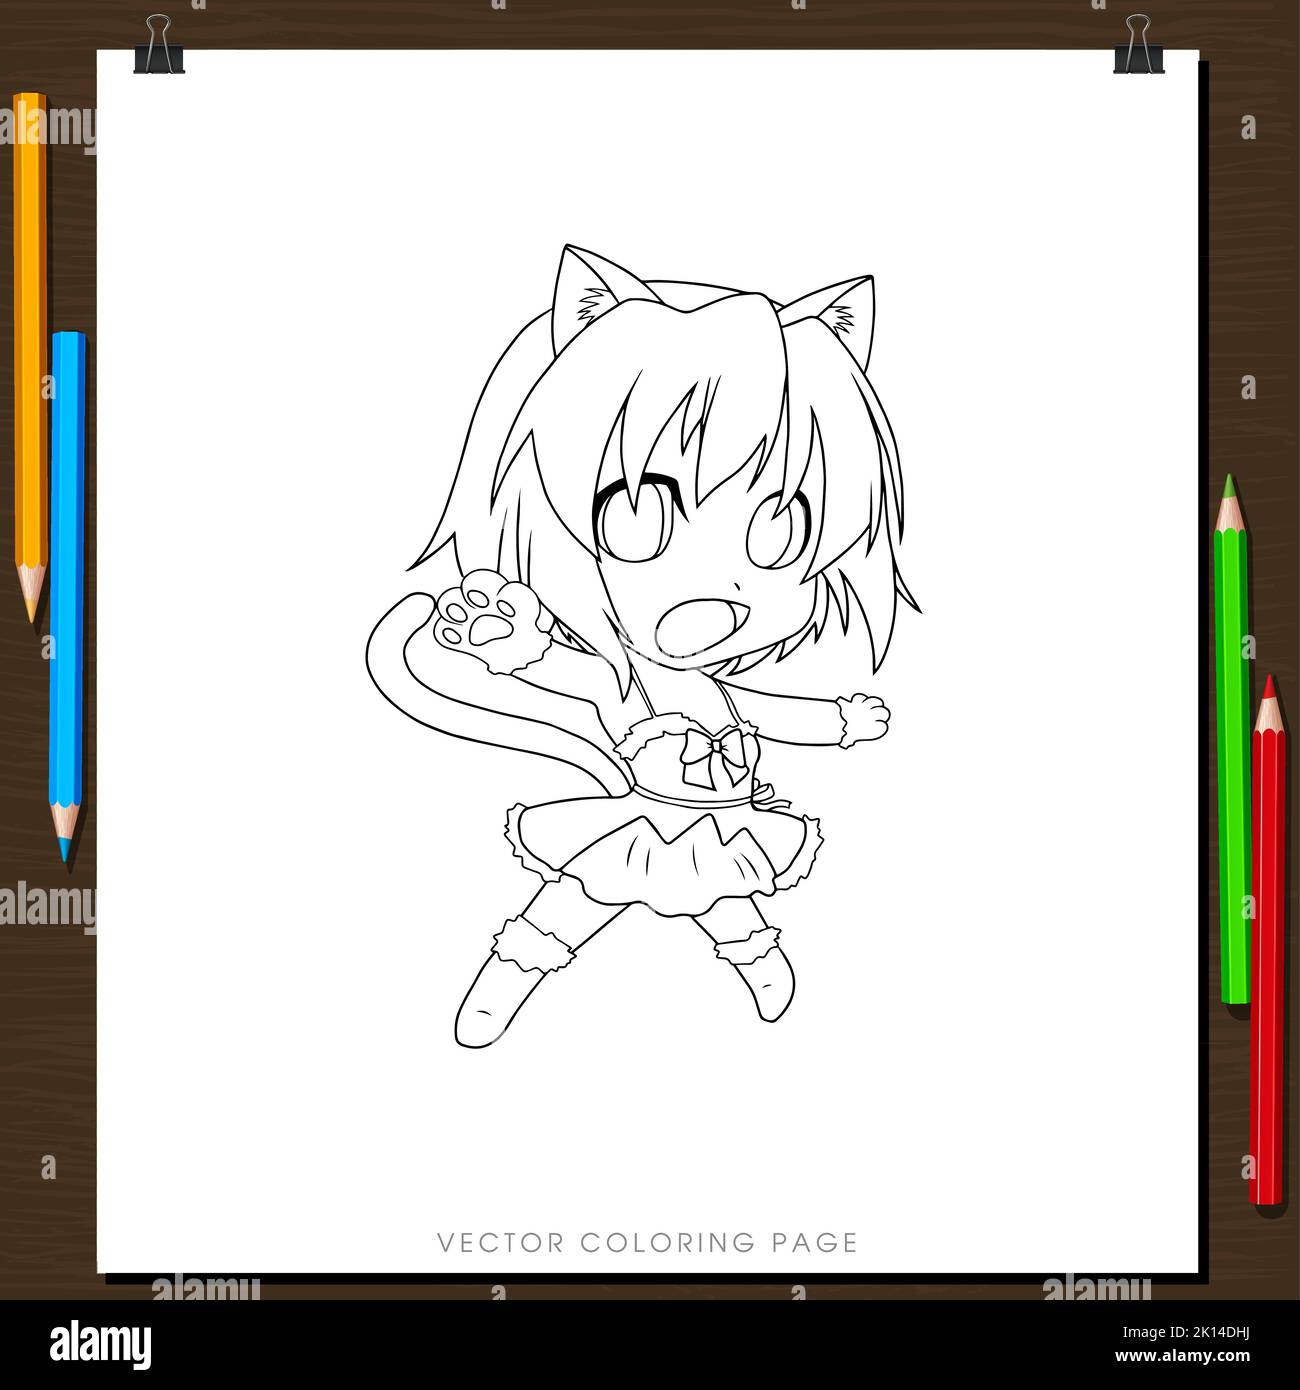 10 Anime Coloring Pages For Kids of All Ages | Skip To My Lou